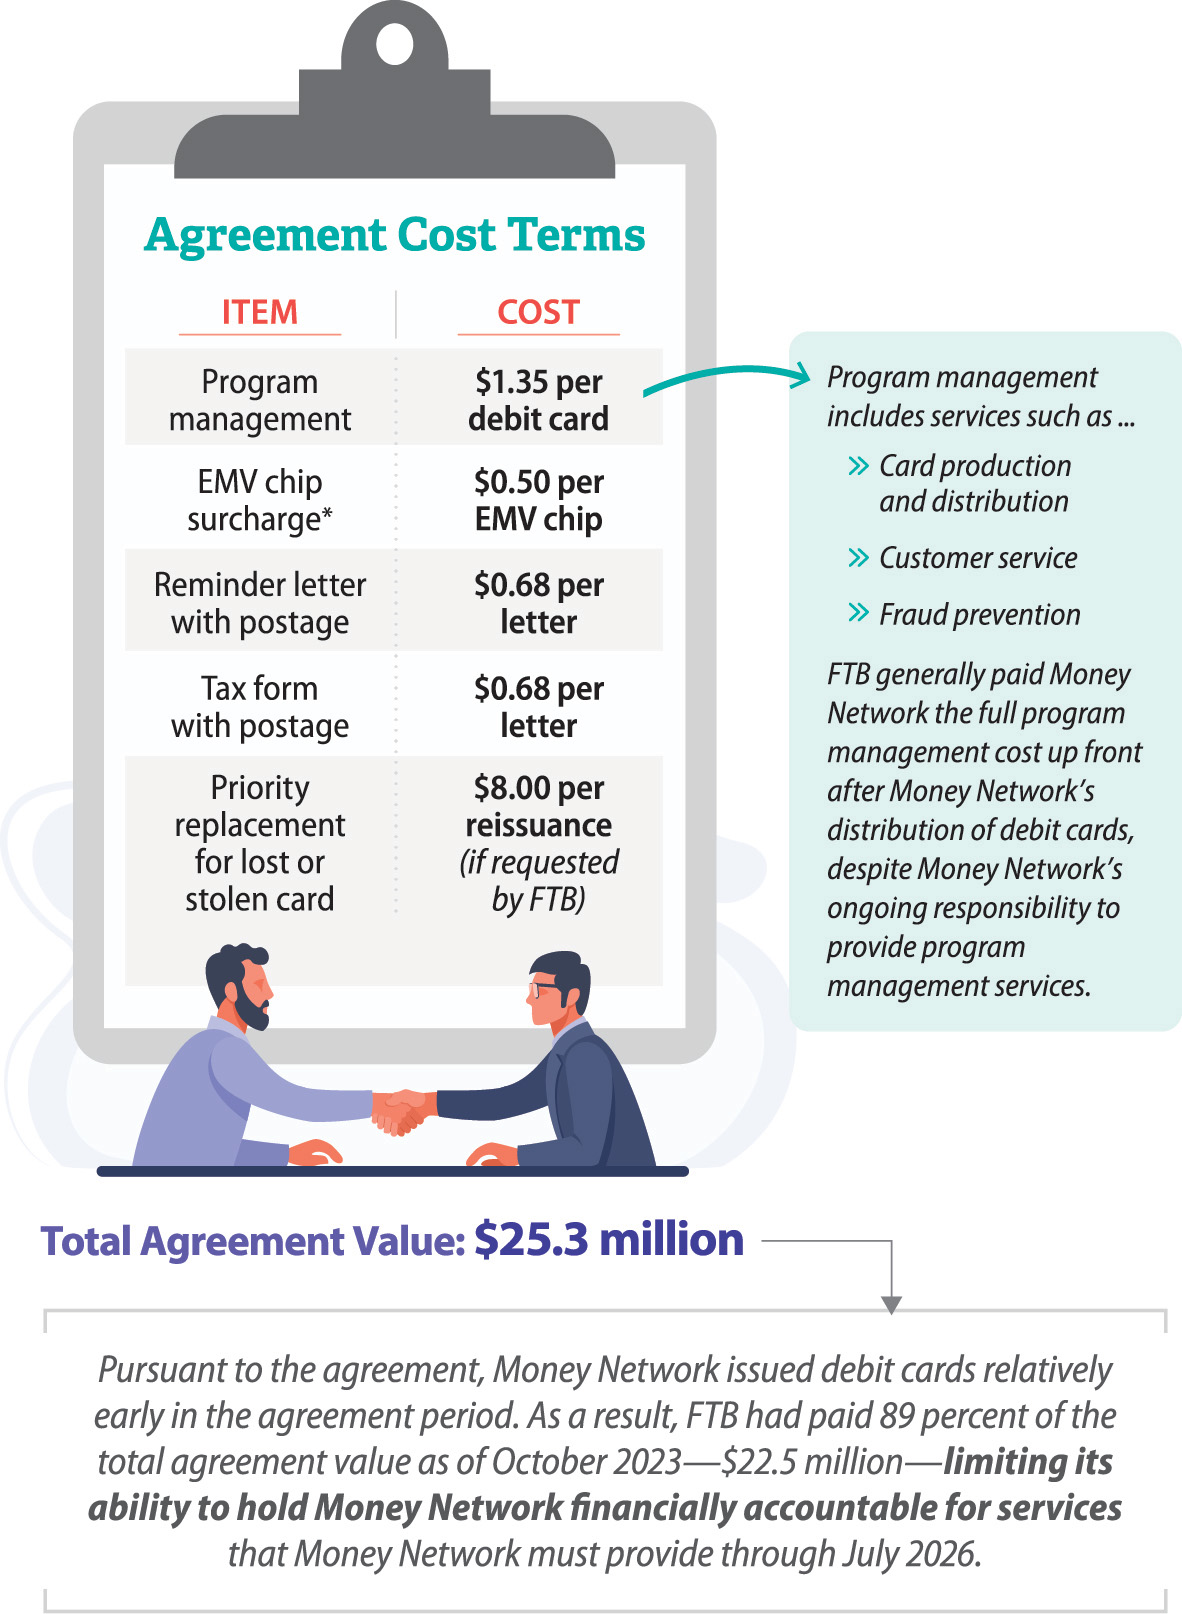 A graphic that describes the agreement cost terms, the services included in the program management cost, the total agreement value of $25.3 million, and the timing with which the Franchise Tax Board generally paid Money Network for issued debit cards.